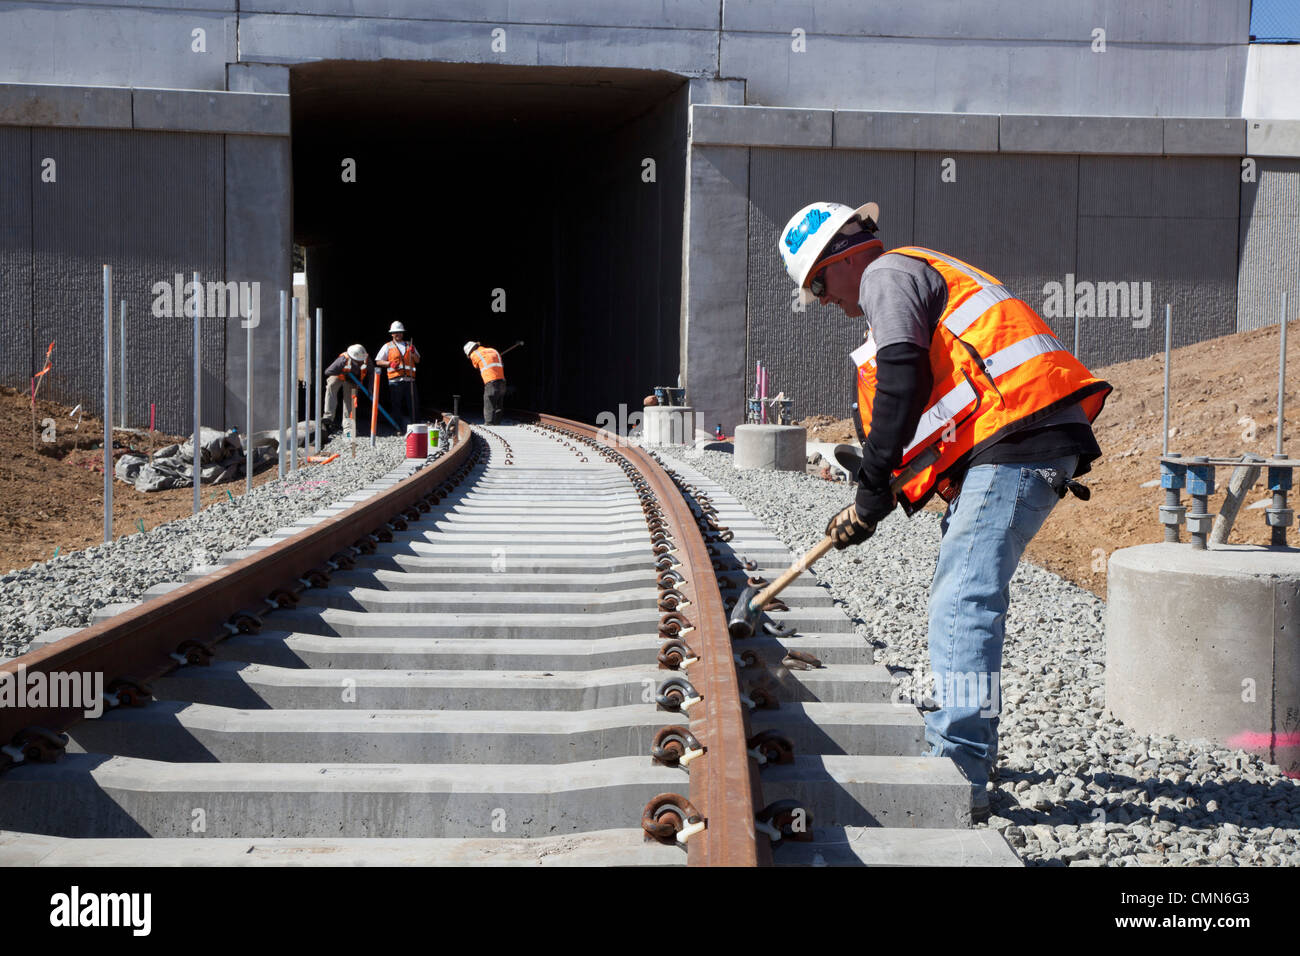 Lakewood, Colorado - Workers build a light rail urban transit system linking Denver with its western suburbs. Stock Photo